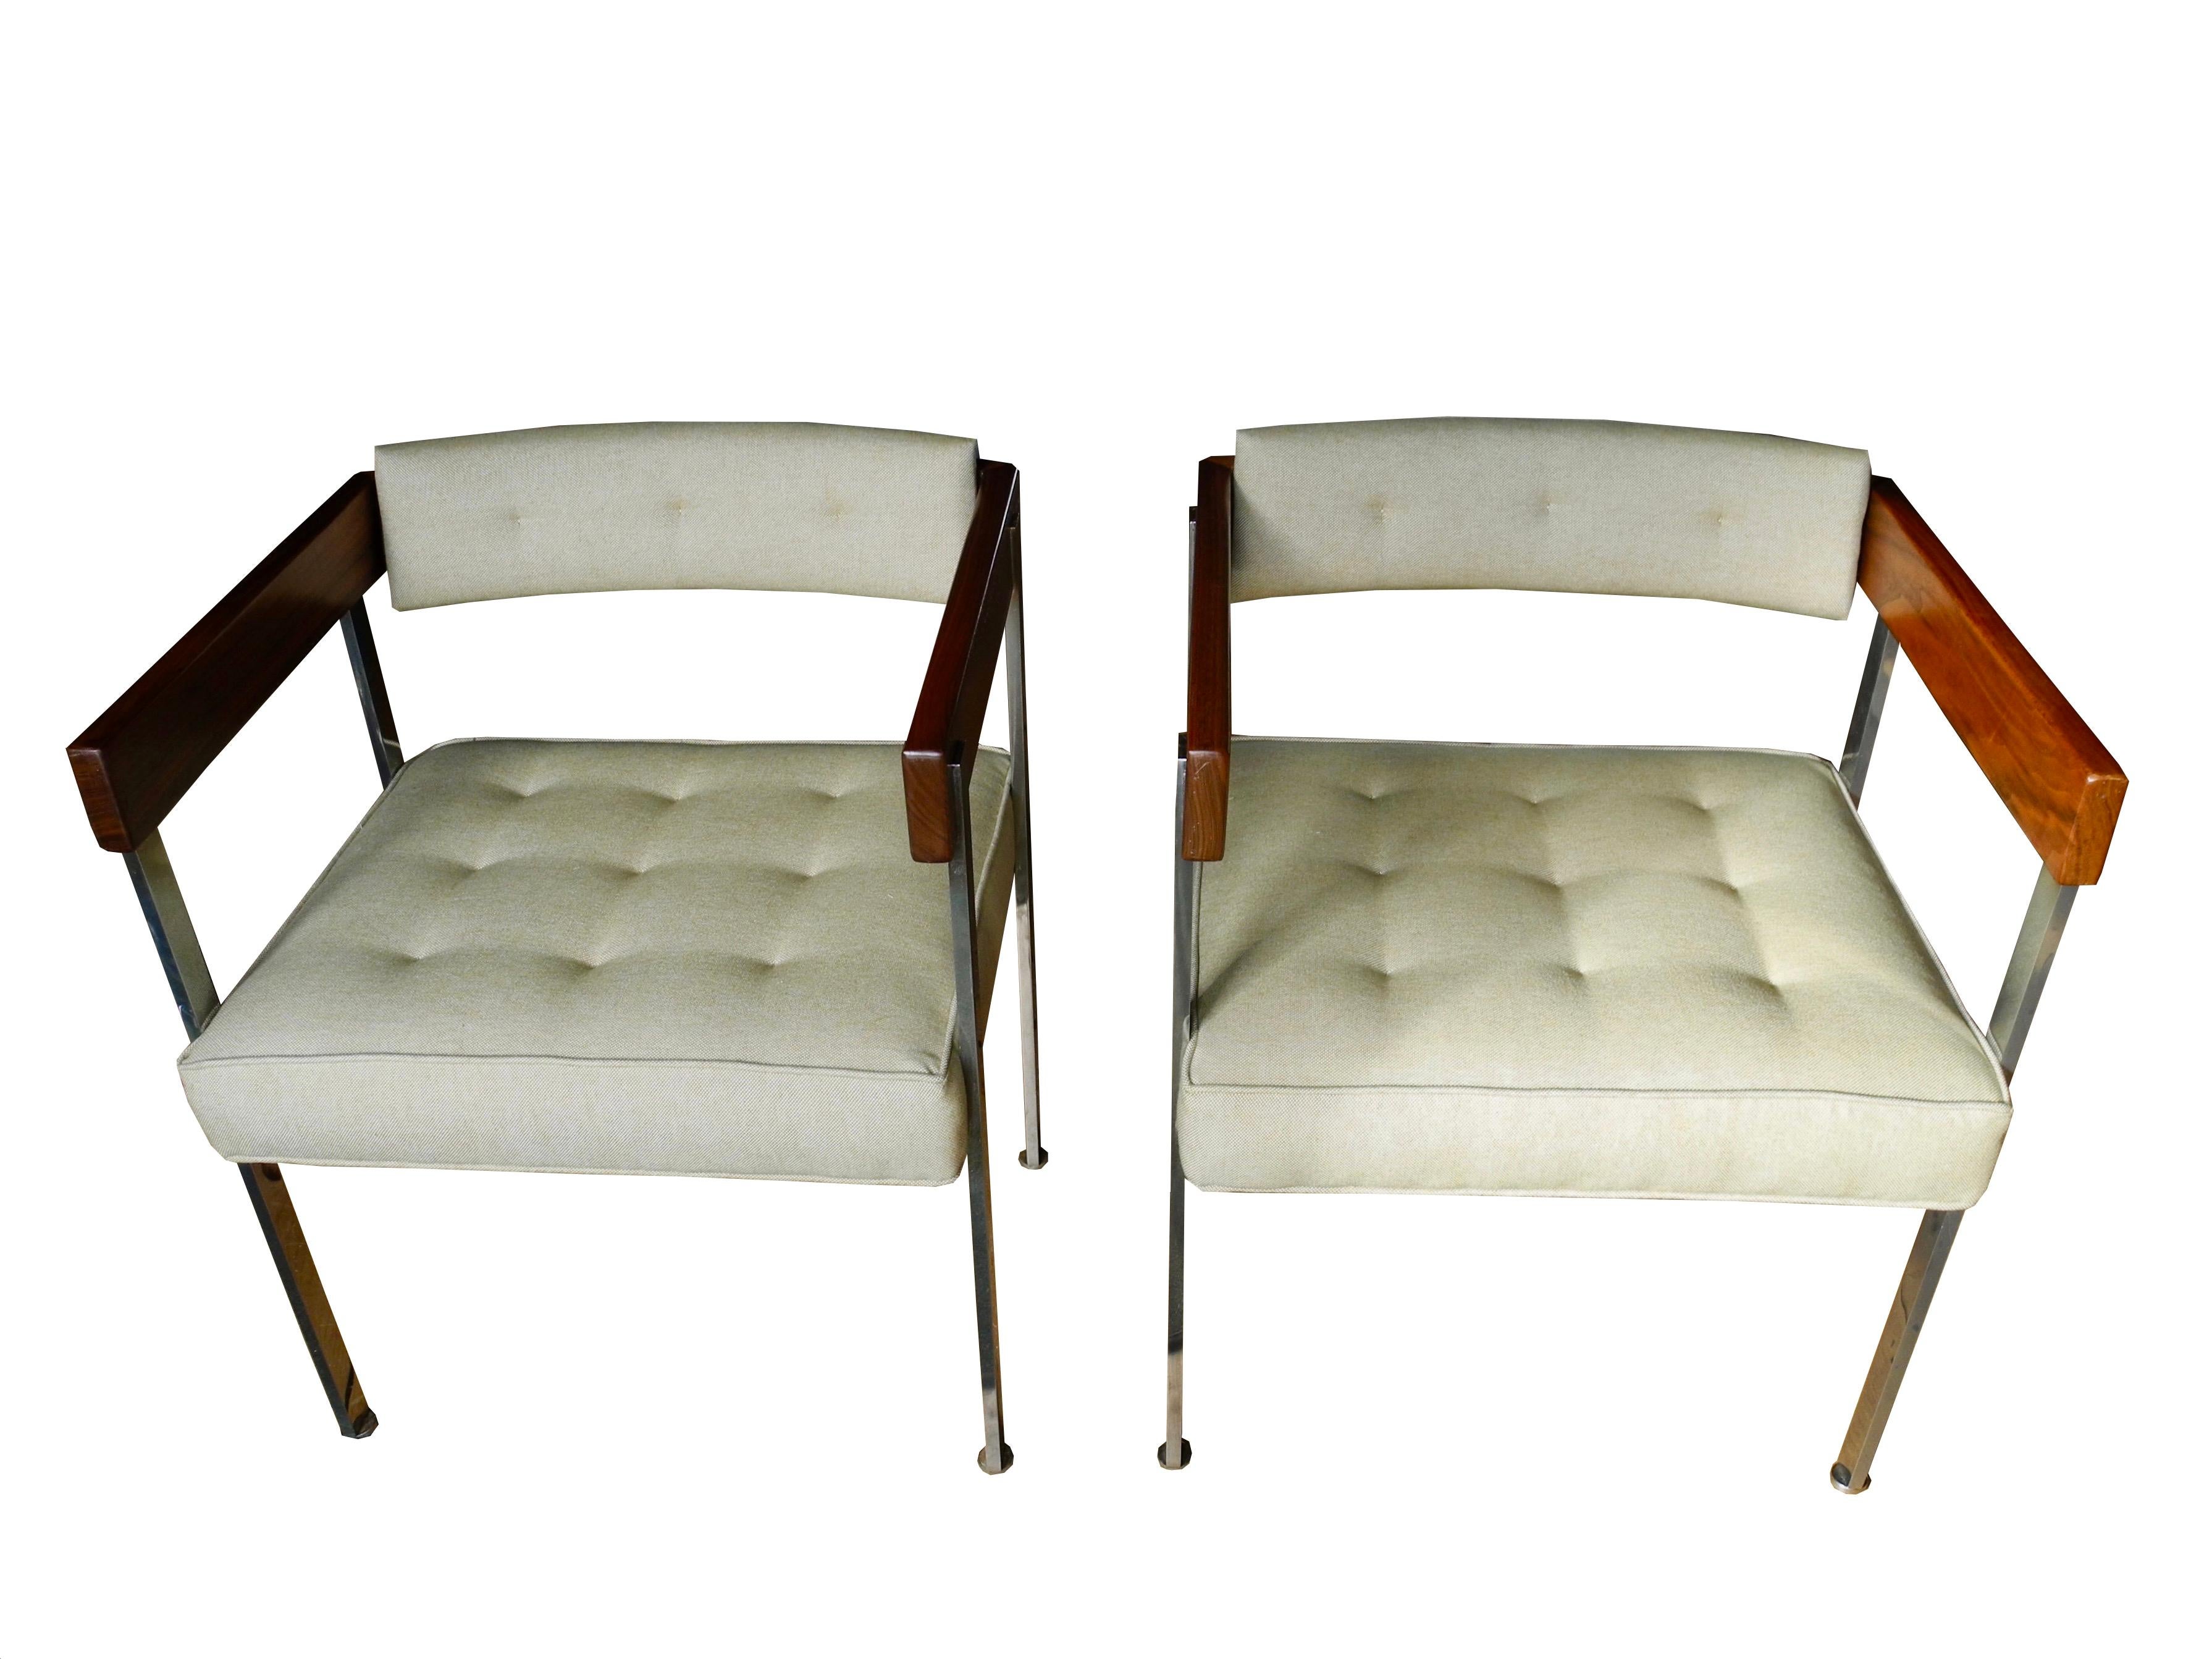 This handsome pair are chairs by Harvey Probber are uniquely made of three materials, solid stainless steel, walnut and upholstery. Probber called them pull-up chairs, designed in 1963. Two more are available upon request.